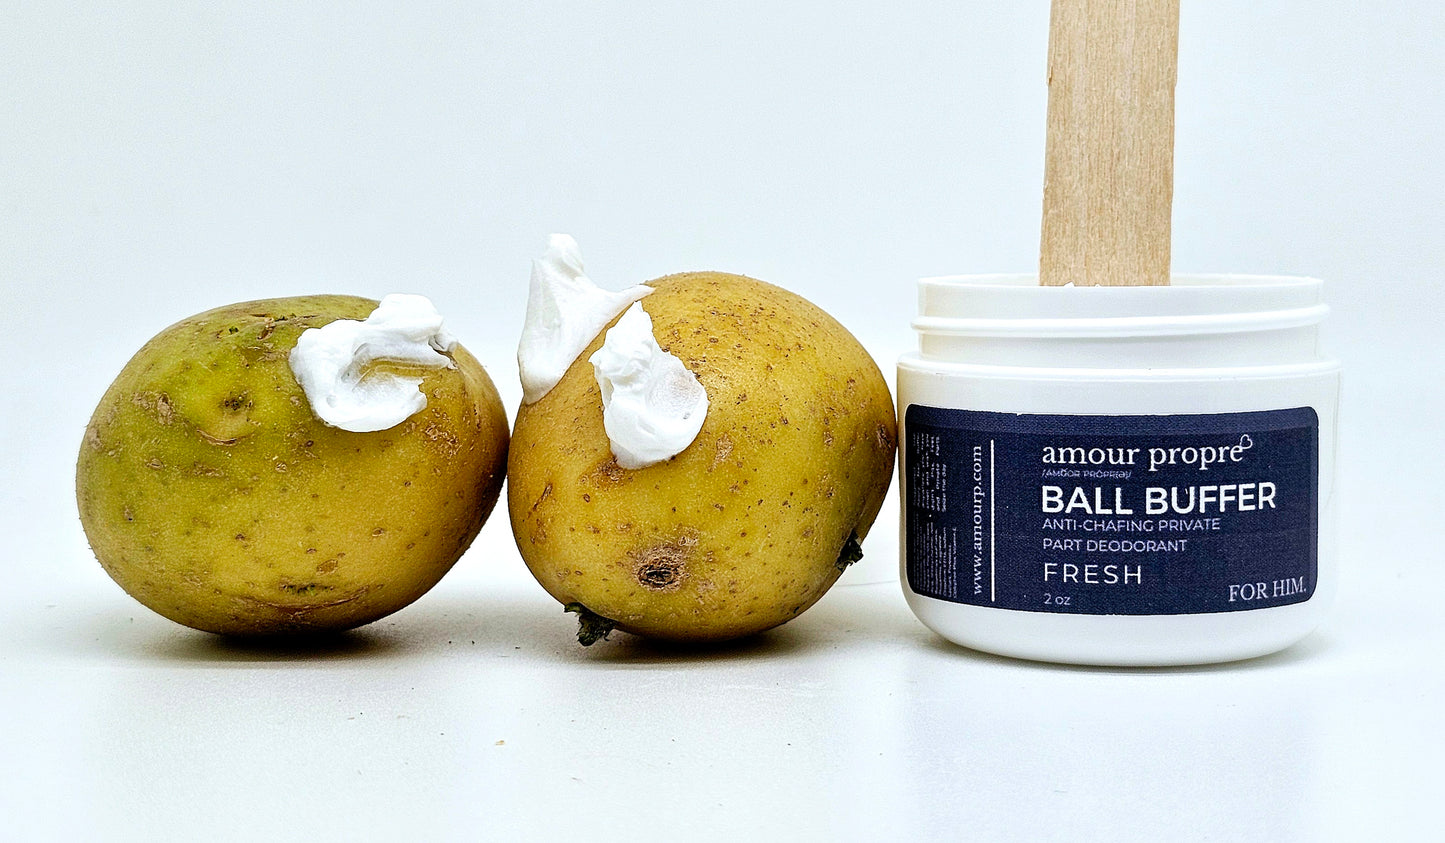 Ball Buffer: FOR HIM. Private part deodorant